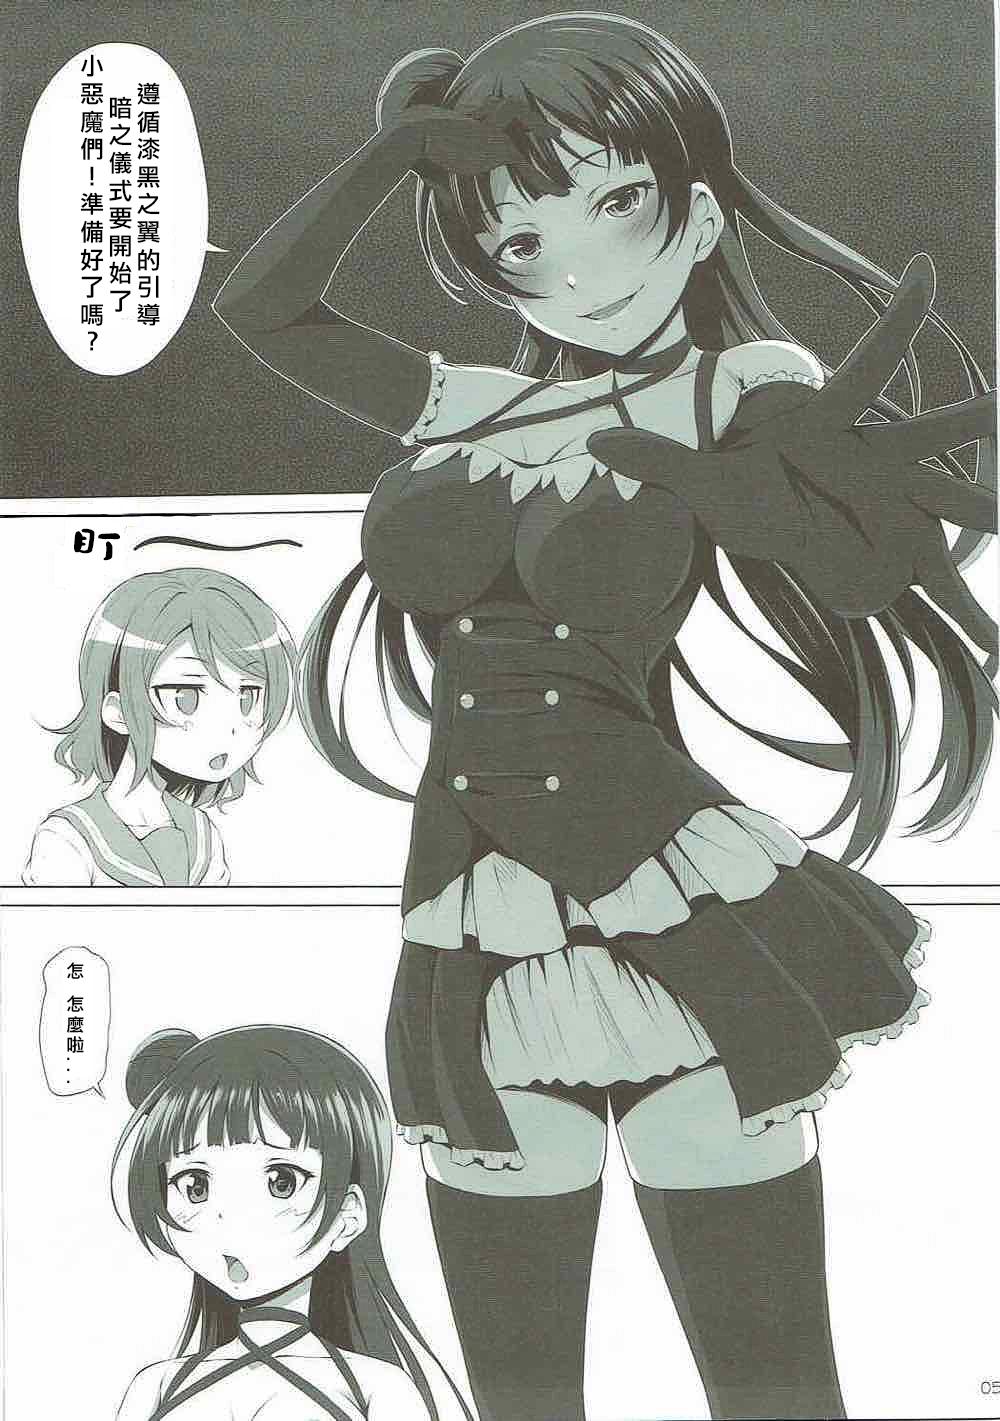 Fuck Pussy Datenshi vs Cosplay Maou | 墮天使 VS Cosplay魔王 - Love live sunshine Beautiful - Page 4